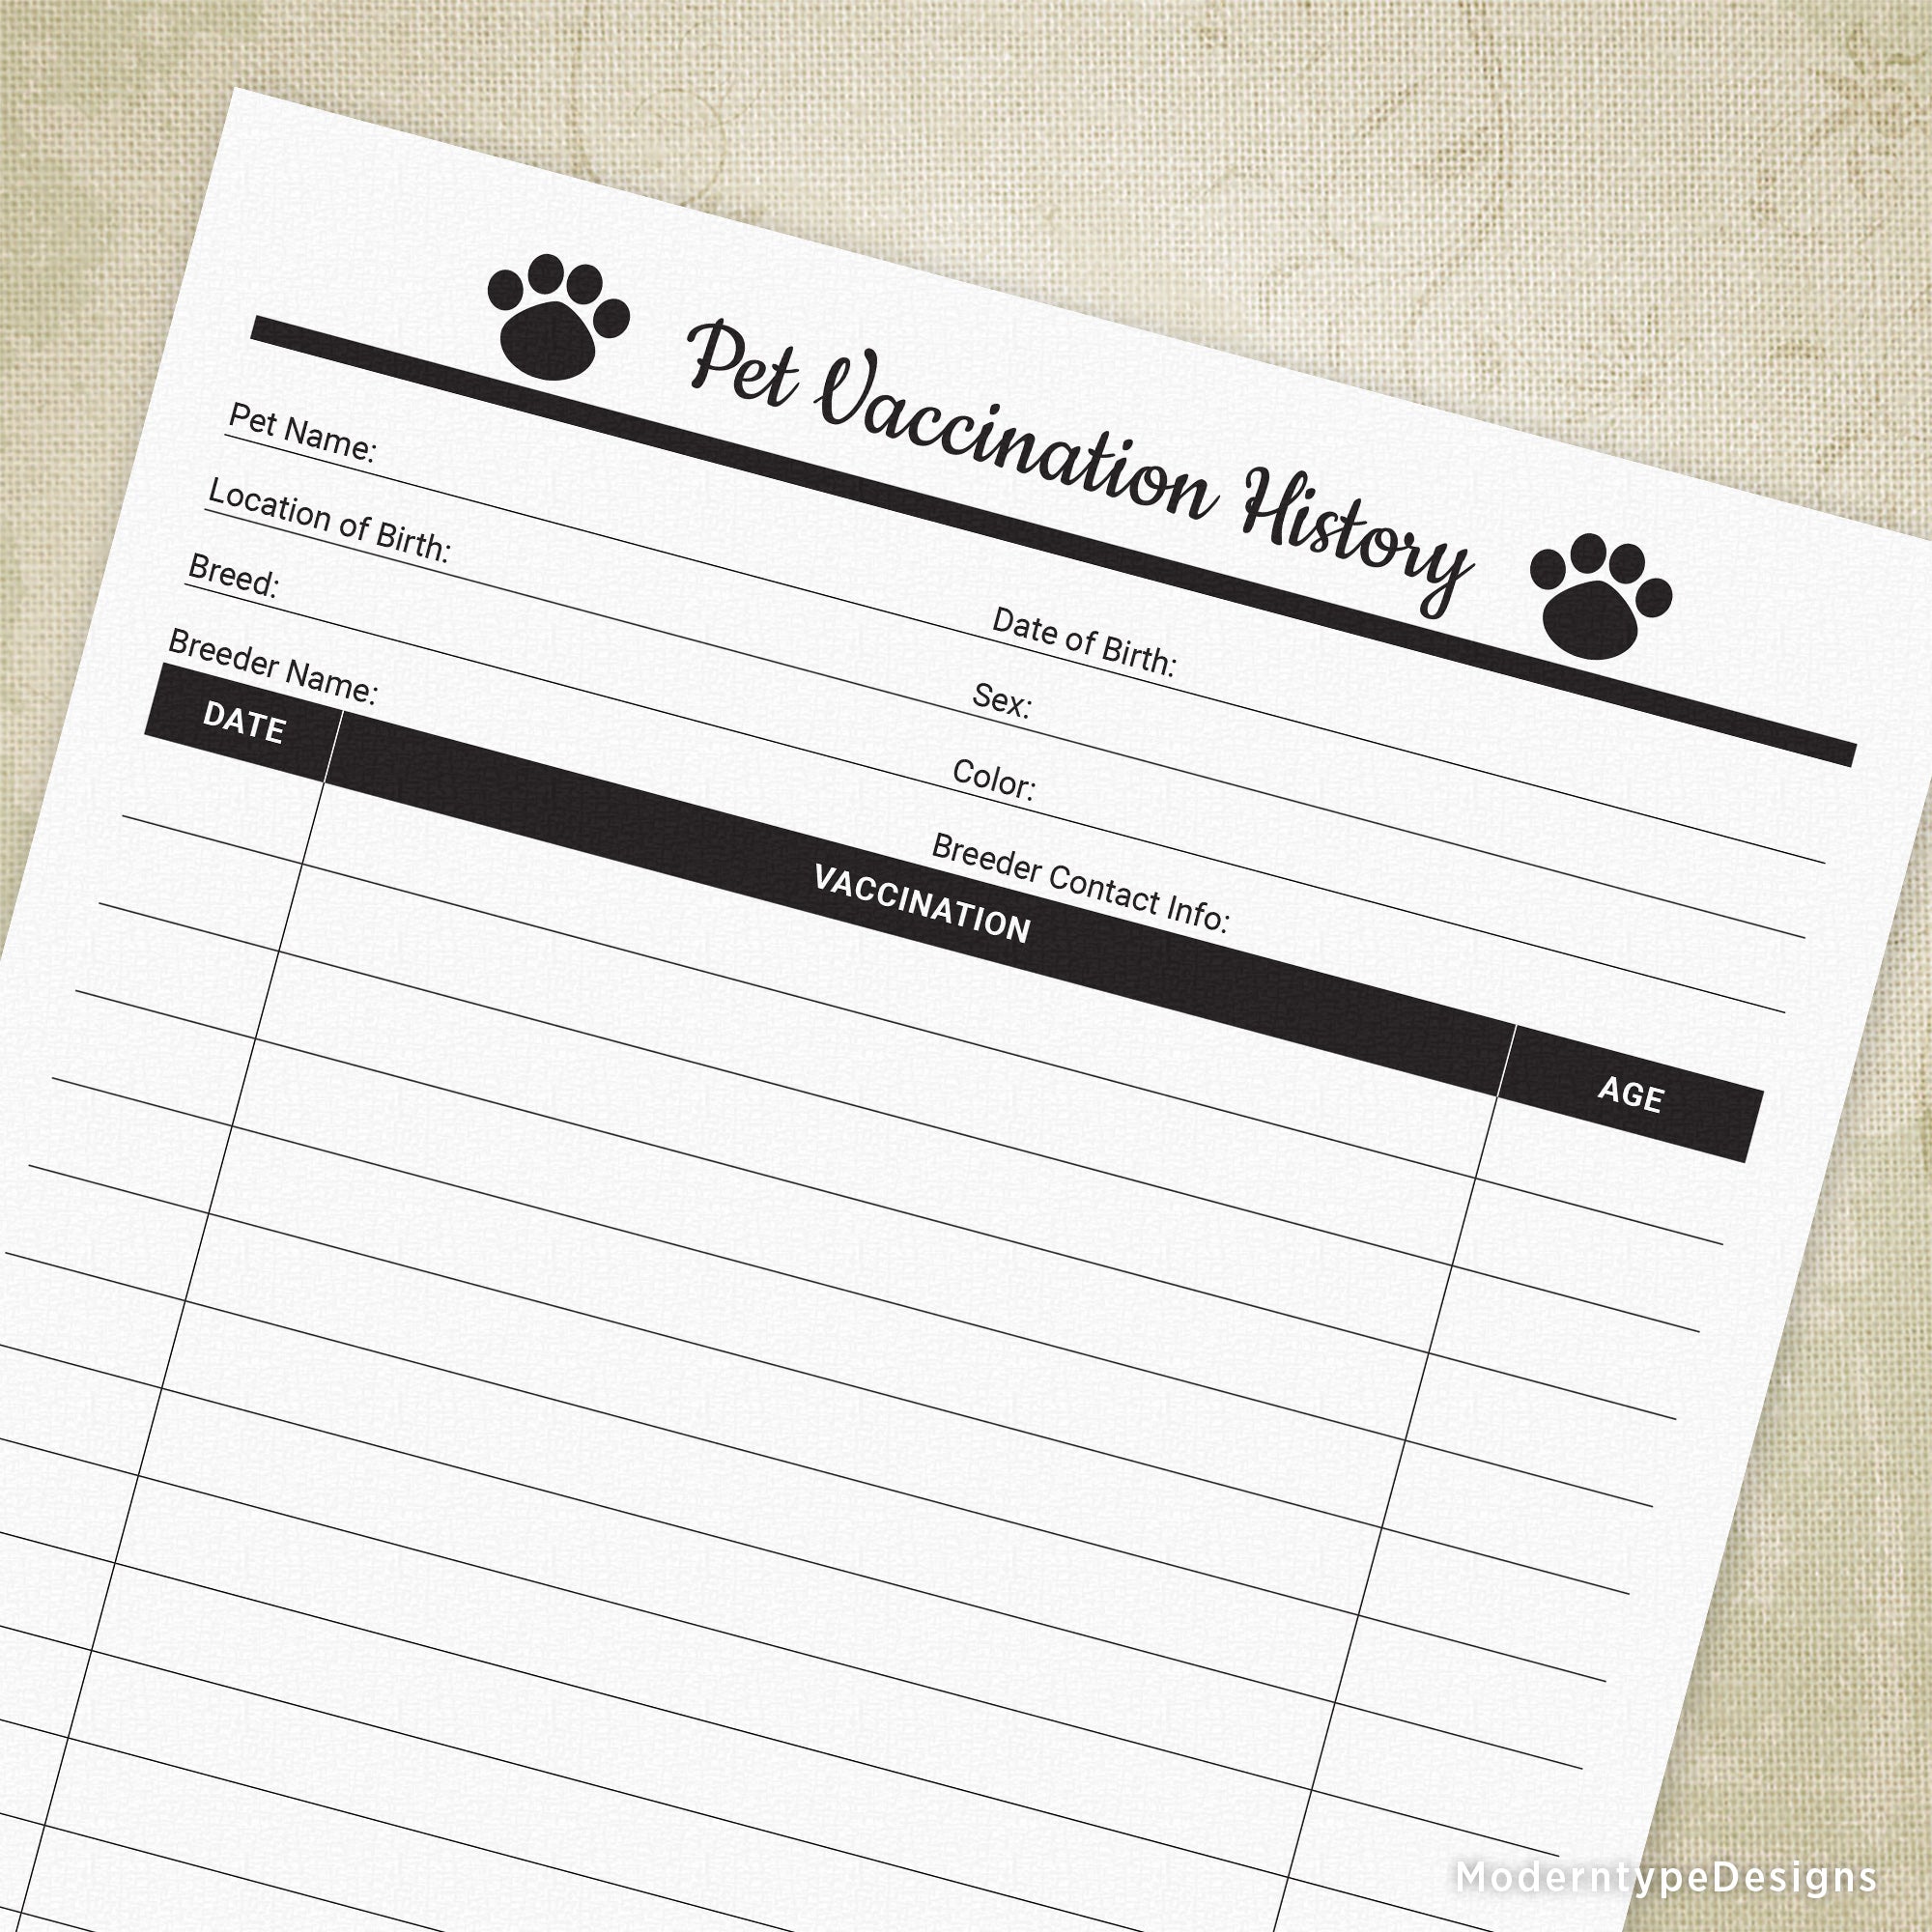 Pet Vaccination History Printable Form for Pet Owners & Businesses